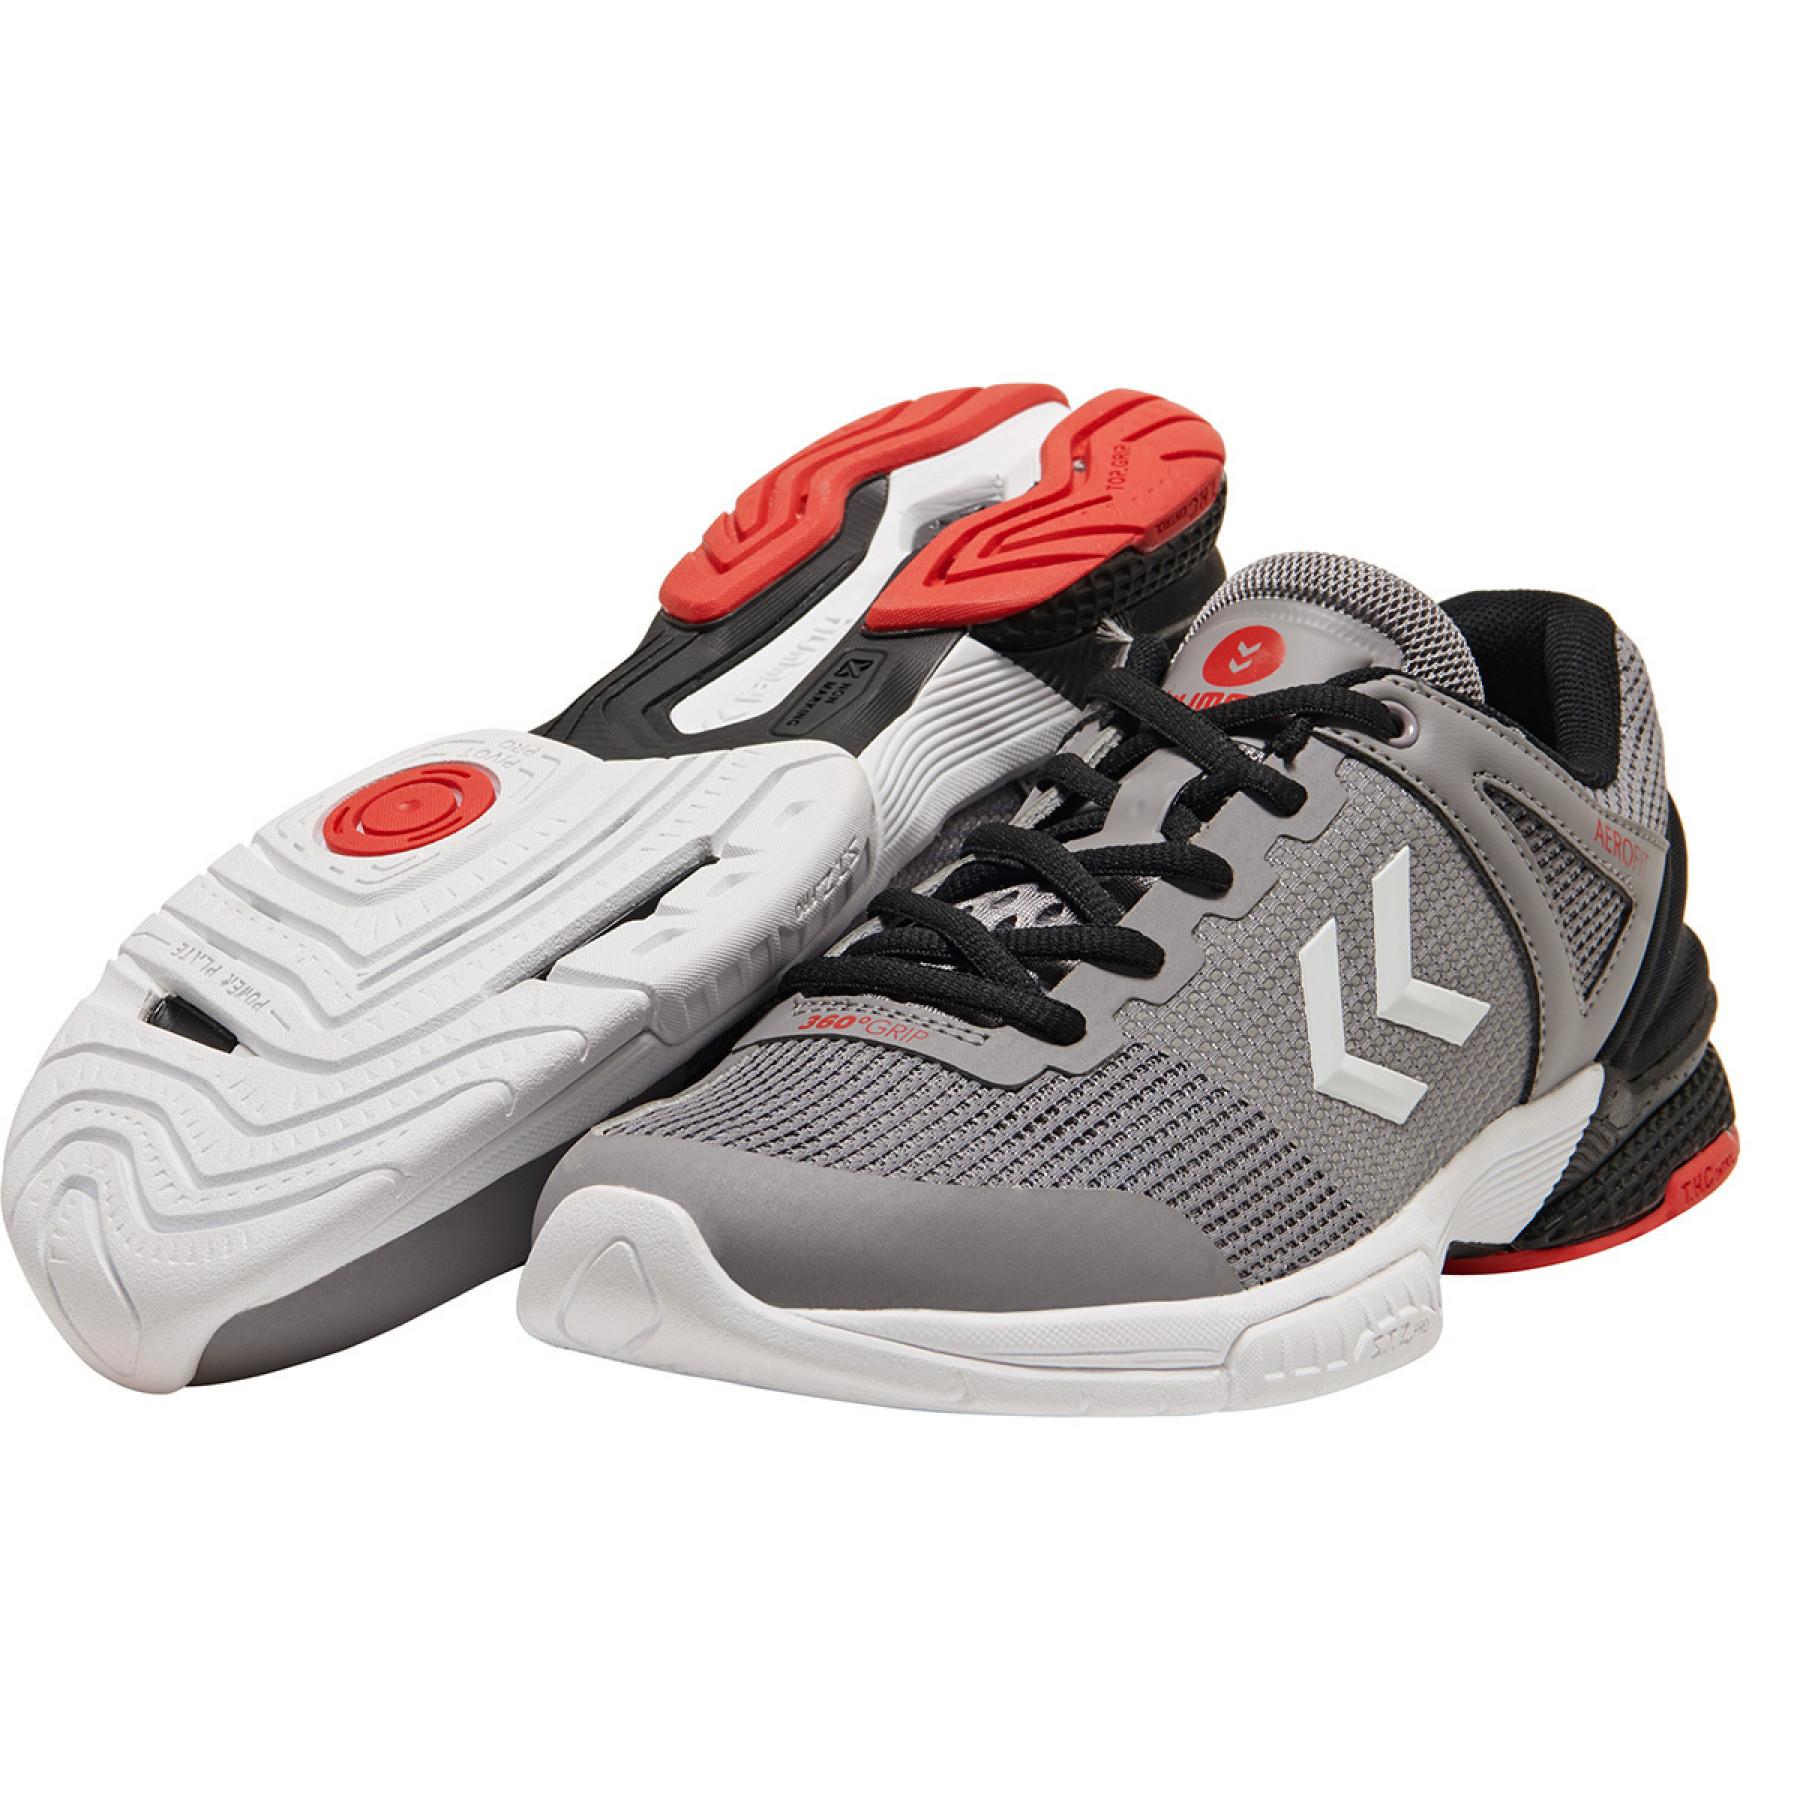 Chaussures Hummel Aerocharge Hb180 Rely 3.0 Trophy